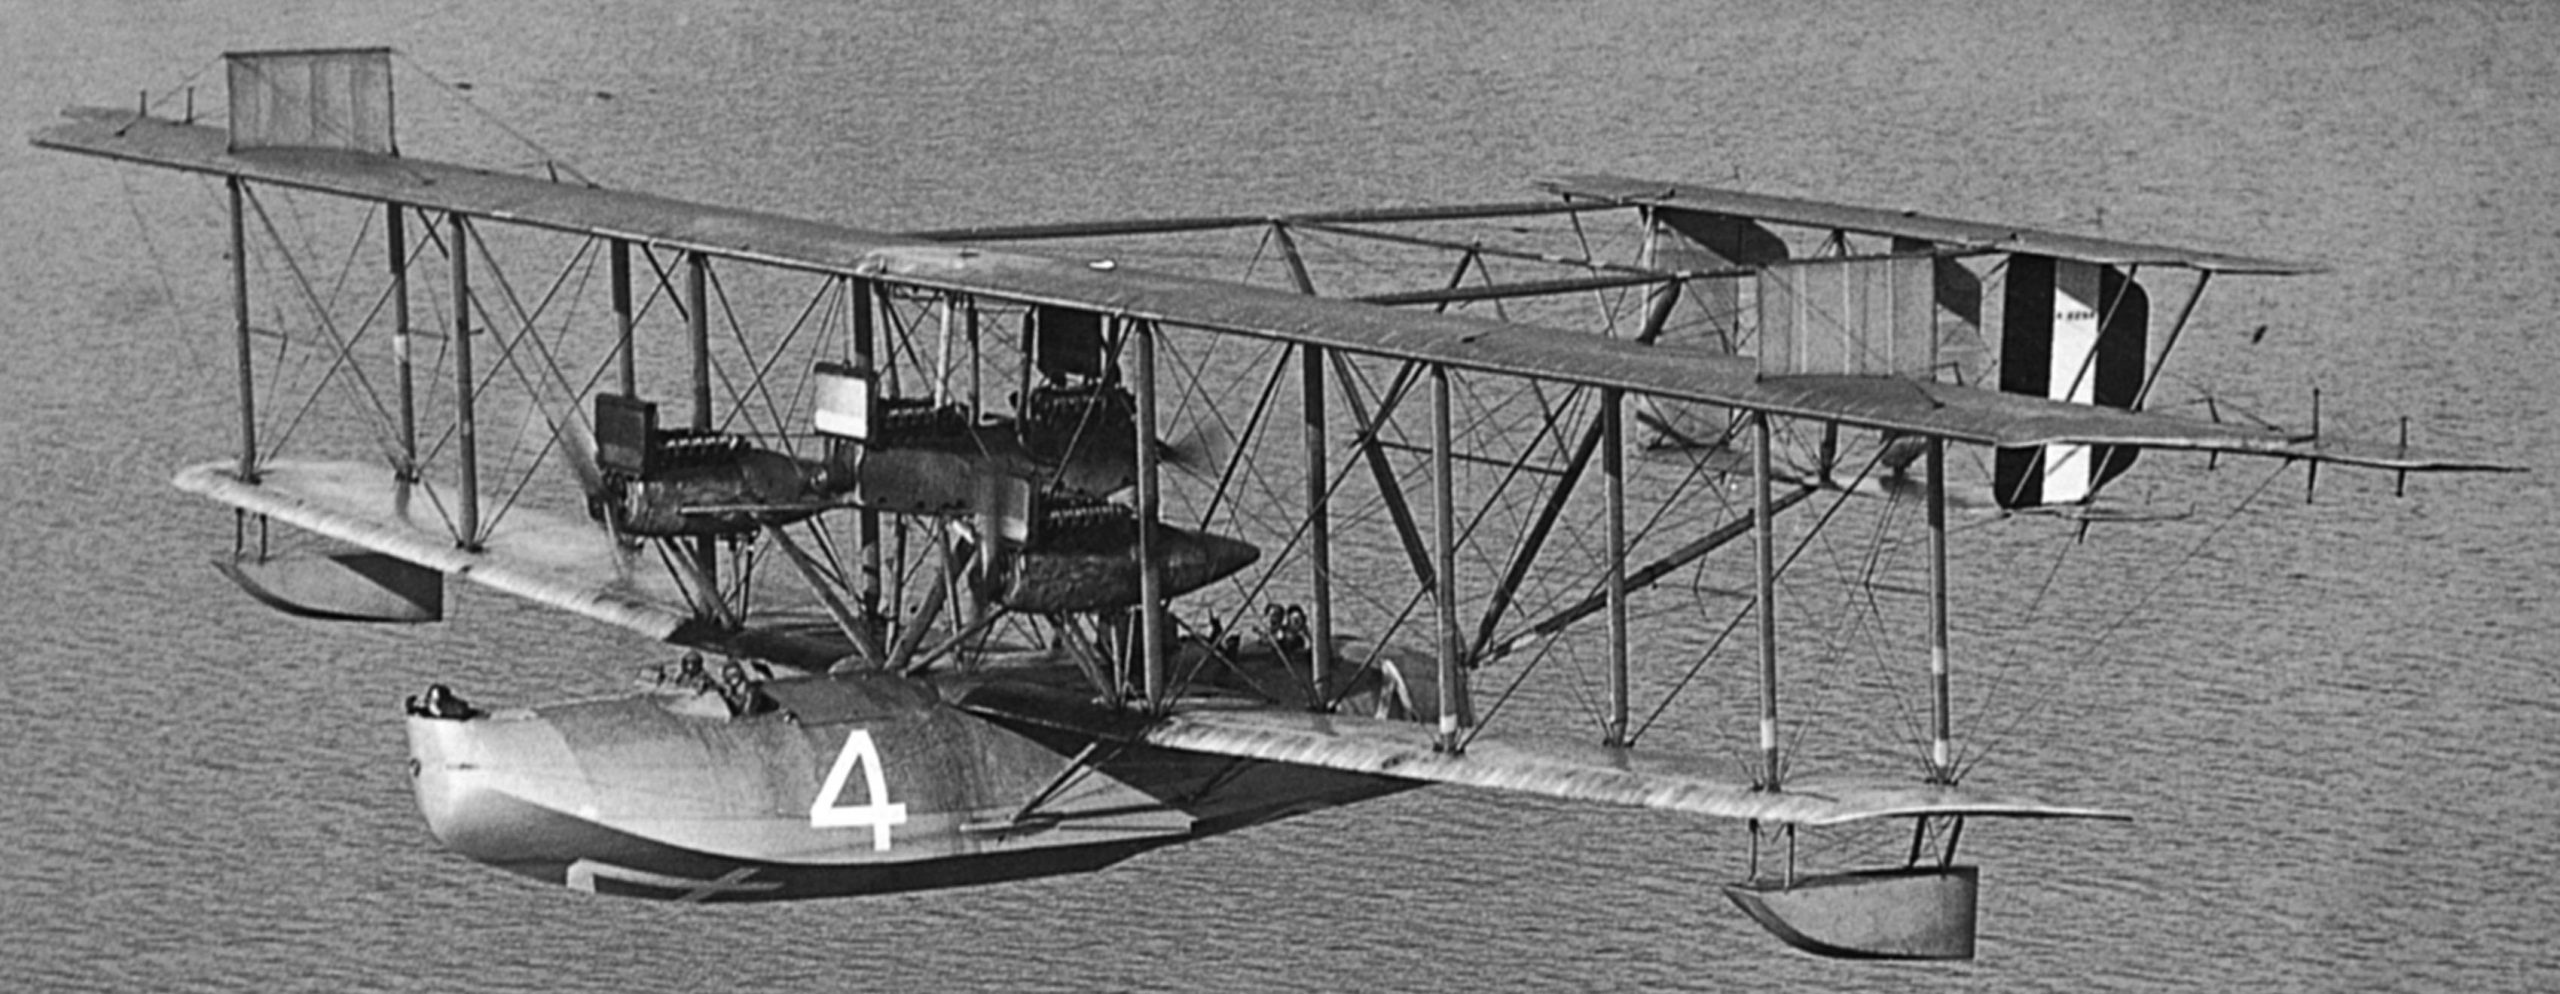 A black and white photograph of a biplane with a white 4 painted on the fuselage.